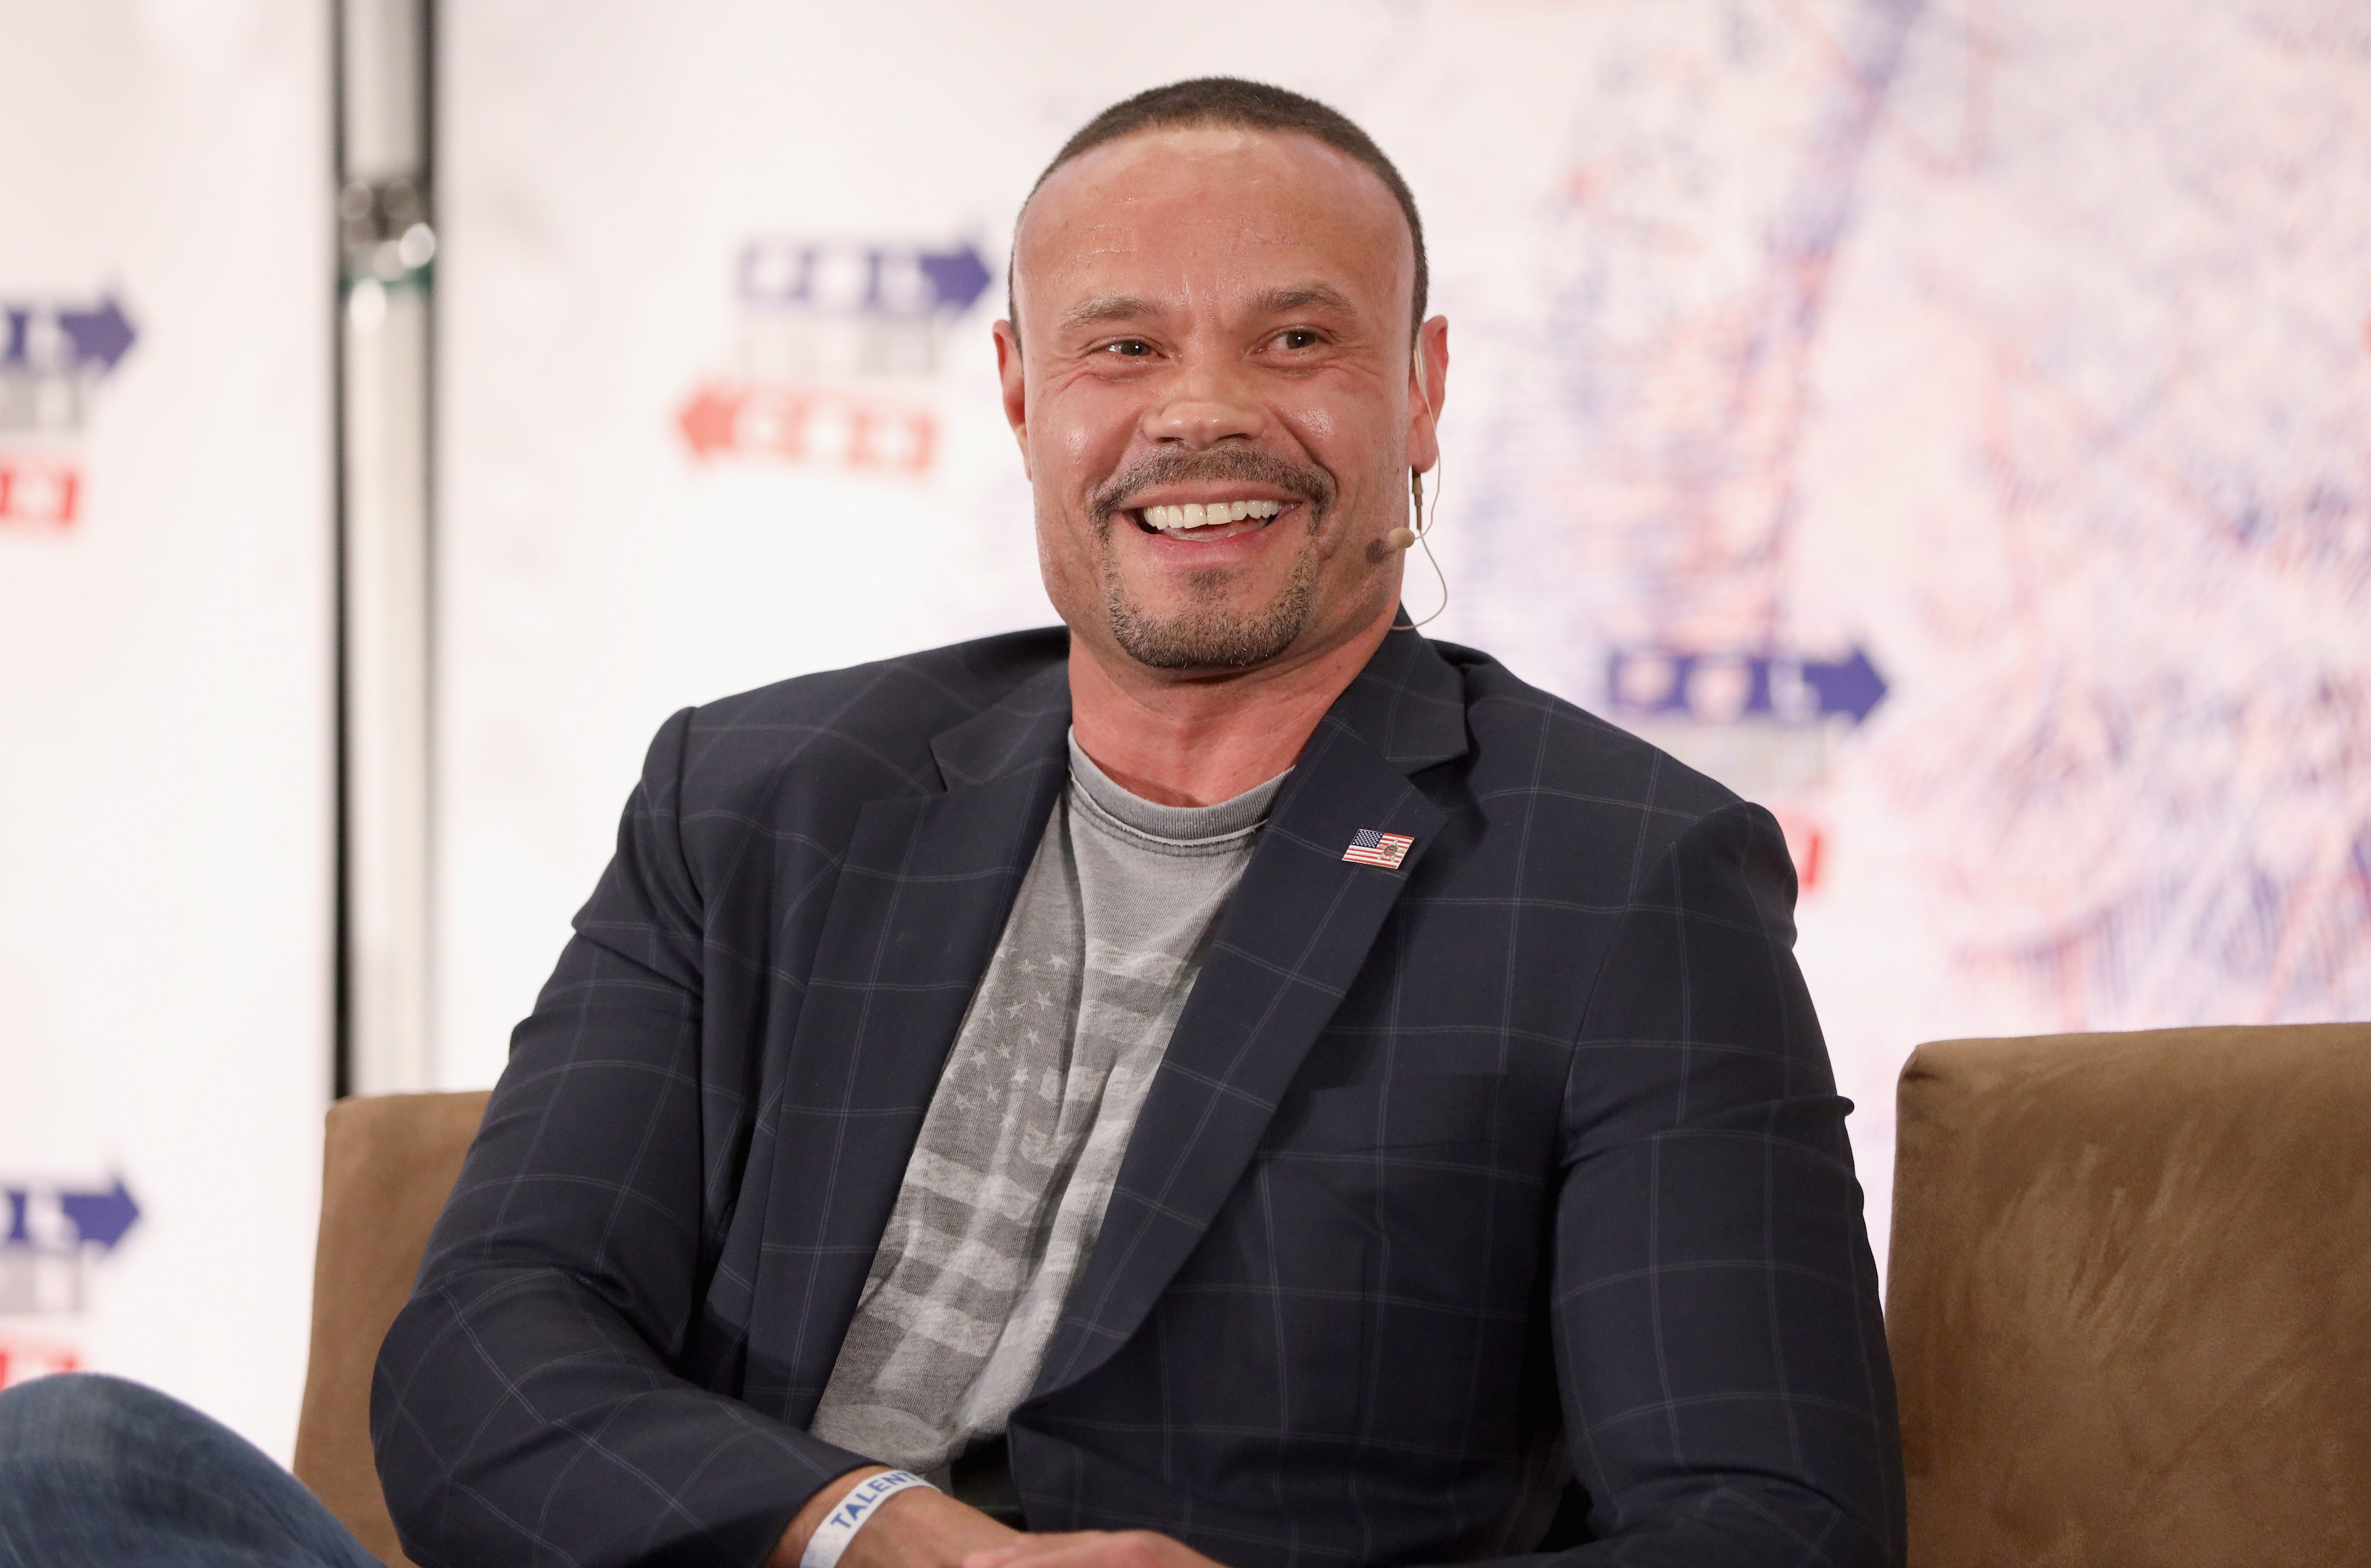 Dan Bongino served with Secret Service for more than a decade